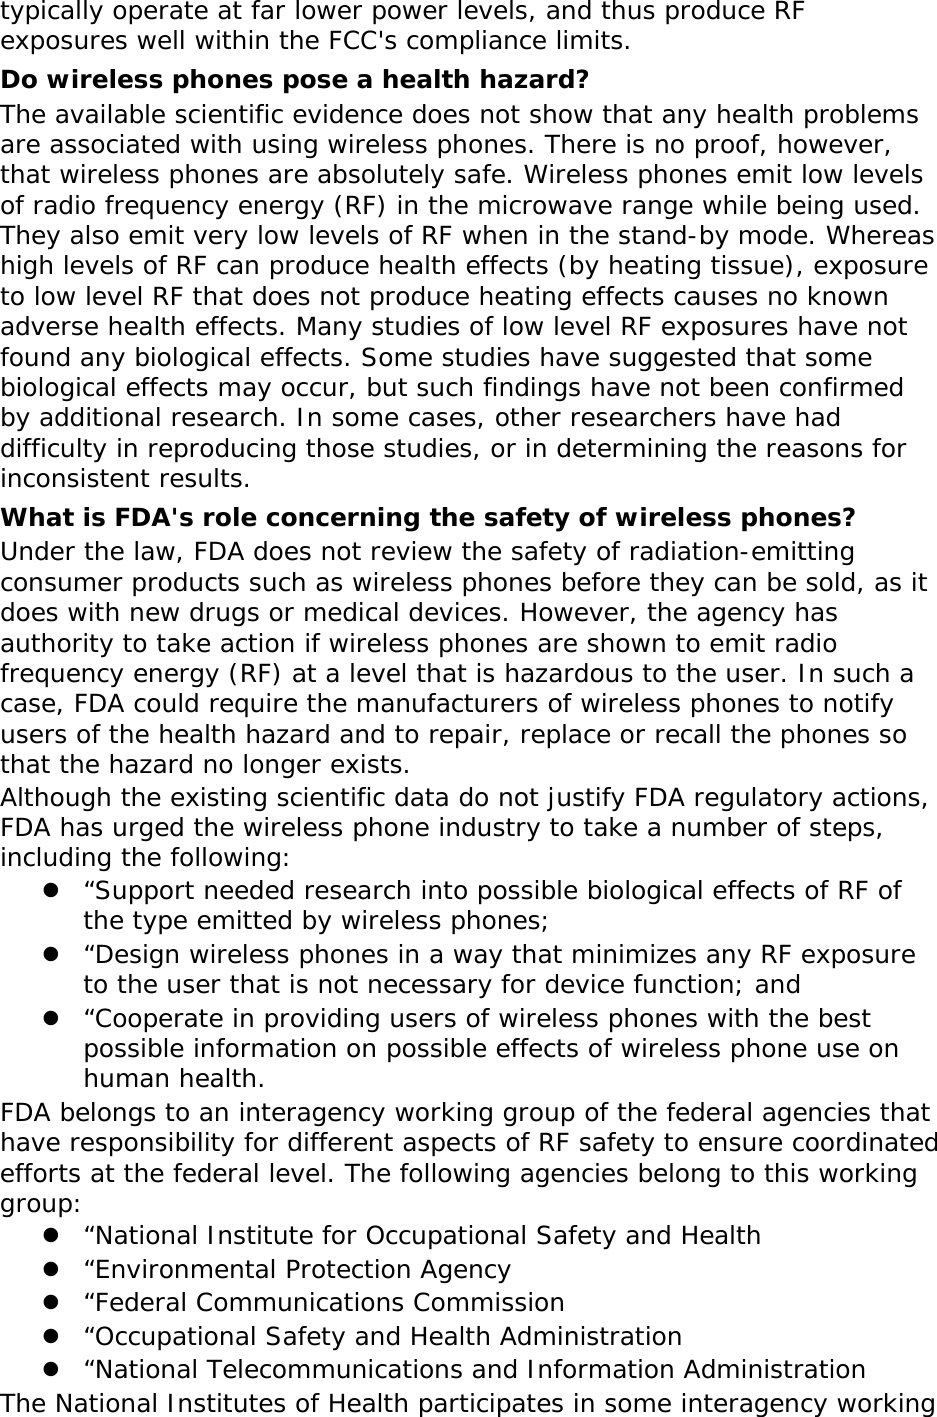 typically operate at far lower power levels, and thus produce RF exposures well within the FCC&apos;s compliance limits. Do wireless phones pose a health hazard? The available scientific evidence does not show that any health problems are associated with using wireless phones. There is no proof, however, that wireless phones are absolutely safe. Wireless phones emit low levels of radio frequency energy (RF) in the microwave range while being used. They also emit very low levels of RF when in the stand-by mode. Whereas high levels of RF can produce health effects (by heating tissue), exposure to low level RF that does not produce heating effects causes no known adverse health effects. Many studies of low level RF exposures have not found any biological effects. Some studies have suggested that some biological effects may occur, but such findings have not been confirmed by additional research. In some cases, other researchers have had difficulty in reproducing those studies, or in determining the reasons for inconsistent results. What is FDA&apos;s role concerning the safety of wireless phones? Under the law, FDA does not review the safety of radiation-emitting consumer products such as wireless phones before they can be sold, as it does with new drugs or medical devices. However, the agency has authority to take action if wireless phones are shown to emit radio frequency energy (RF) at a level that is hazardous to the user. In such a case, FDA could require the manufacturers of wireless phones to notify users of the health hazard and to repair, replace or recall the phones so that the hazard no longer exists. Although the existing scientific data do not justify FDA regulatory actions, FDA has urged the wireless phone industry to take a number of steps, including the following: z “Support needed research into possible biological effects of RF of the type emitted by wireless phones; z “Design wireless phones in a way that minimizes any RF exposure to the user that is not necessary for device function; and z “Cooperate in providing users of wireless phones with the best possible information on possible effects of wireless phone use on human health. FDA belongs to an interagency working group of the federal agencies that have responsibility for different aspects of RF safety to ensure coordinated efforts at the federal level. The following agencies belong to this working group: z “National Institute for Occupational Safety and Health z “Environmental Protection Agency z “Federal Communications Commission z “Occupational Safety and Health Administration z “National Telecommunications and Information Administration The National Institutes of Health participates in some interagency working 